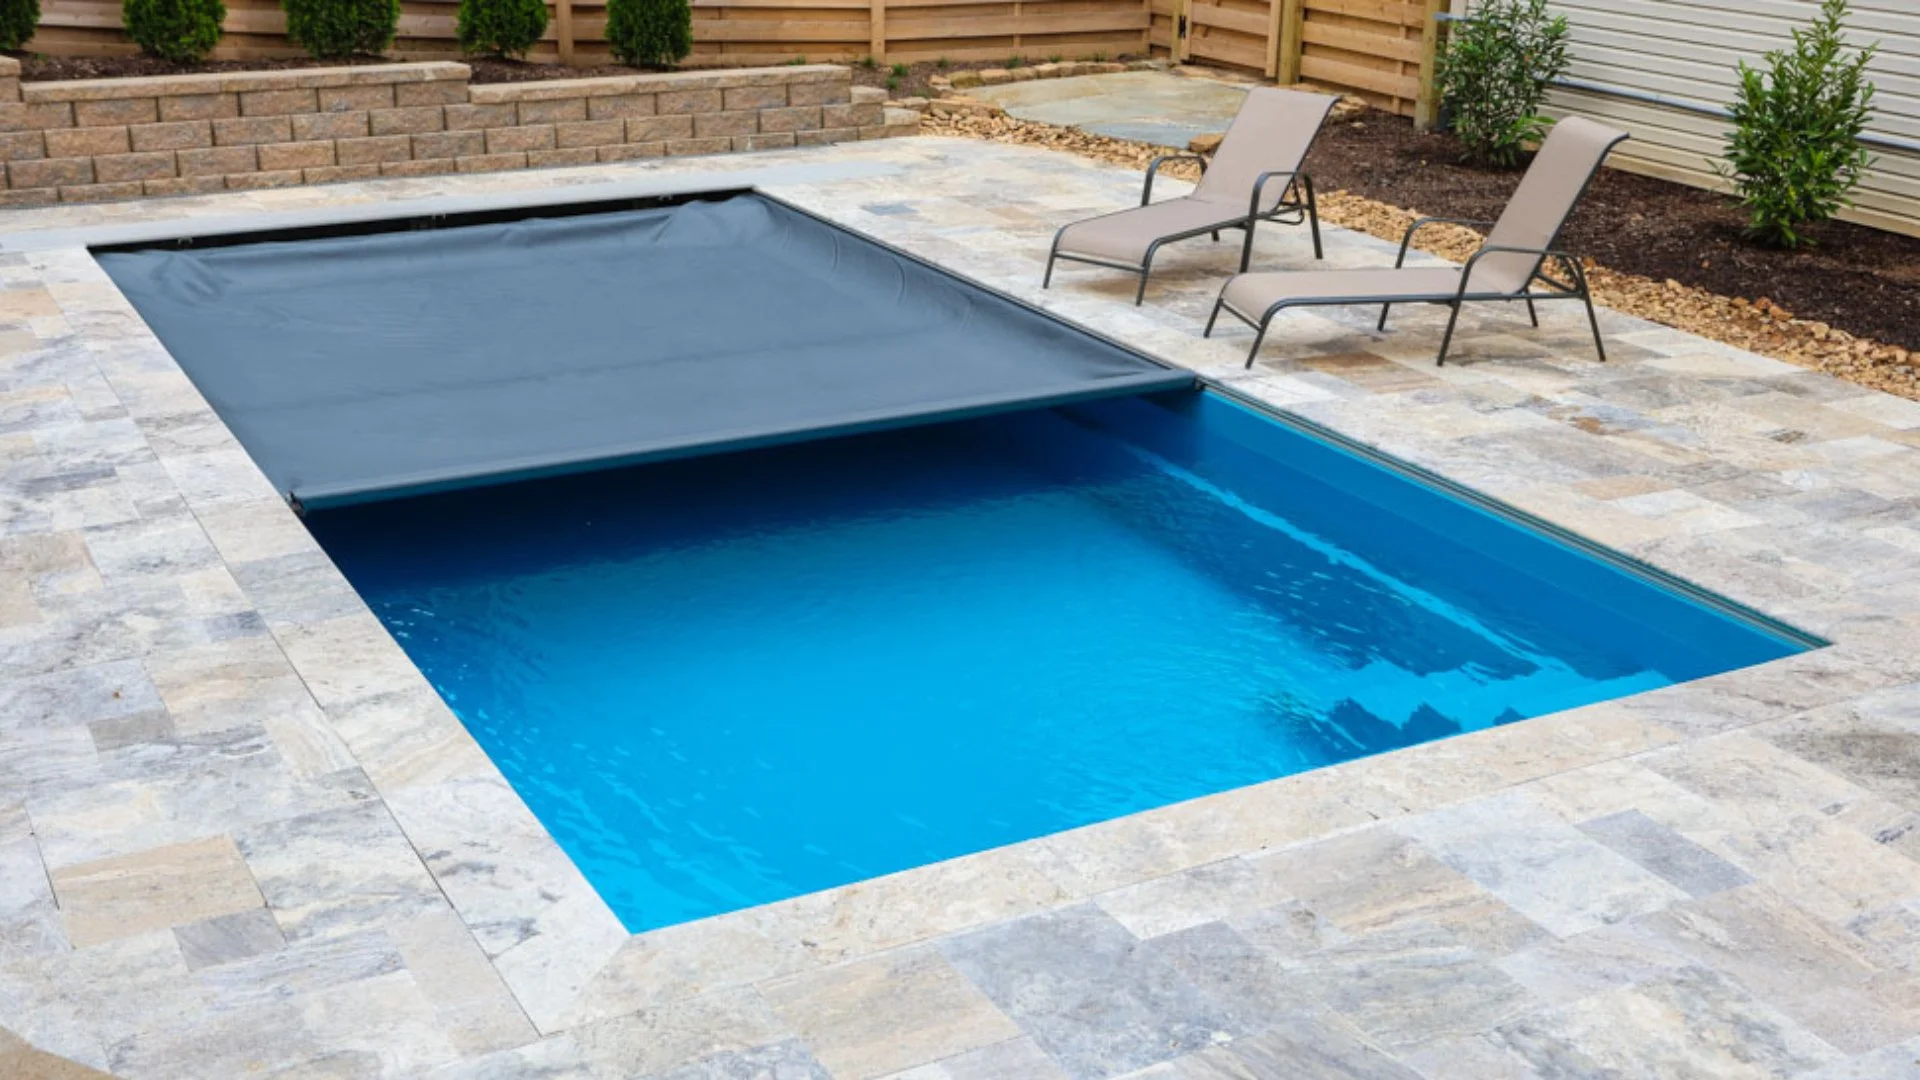 3 Reasons Why You Should Invest in an Automatic Pool Cover